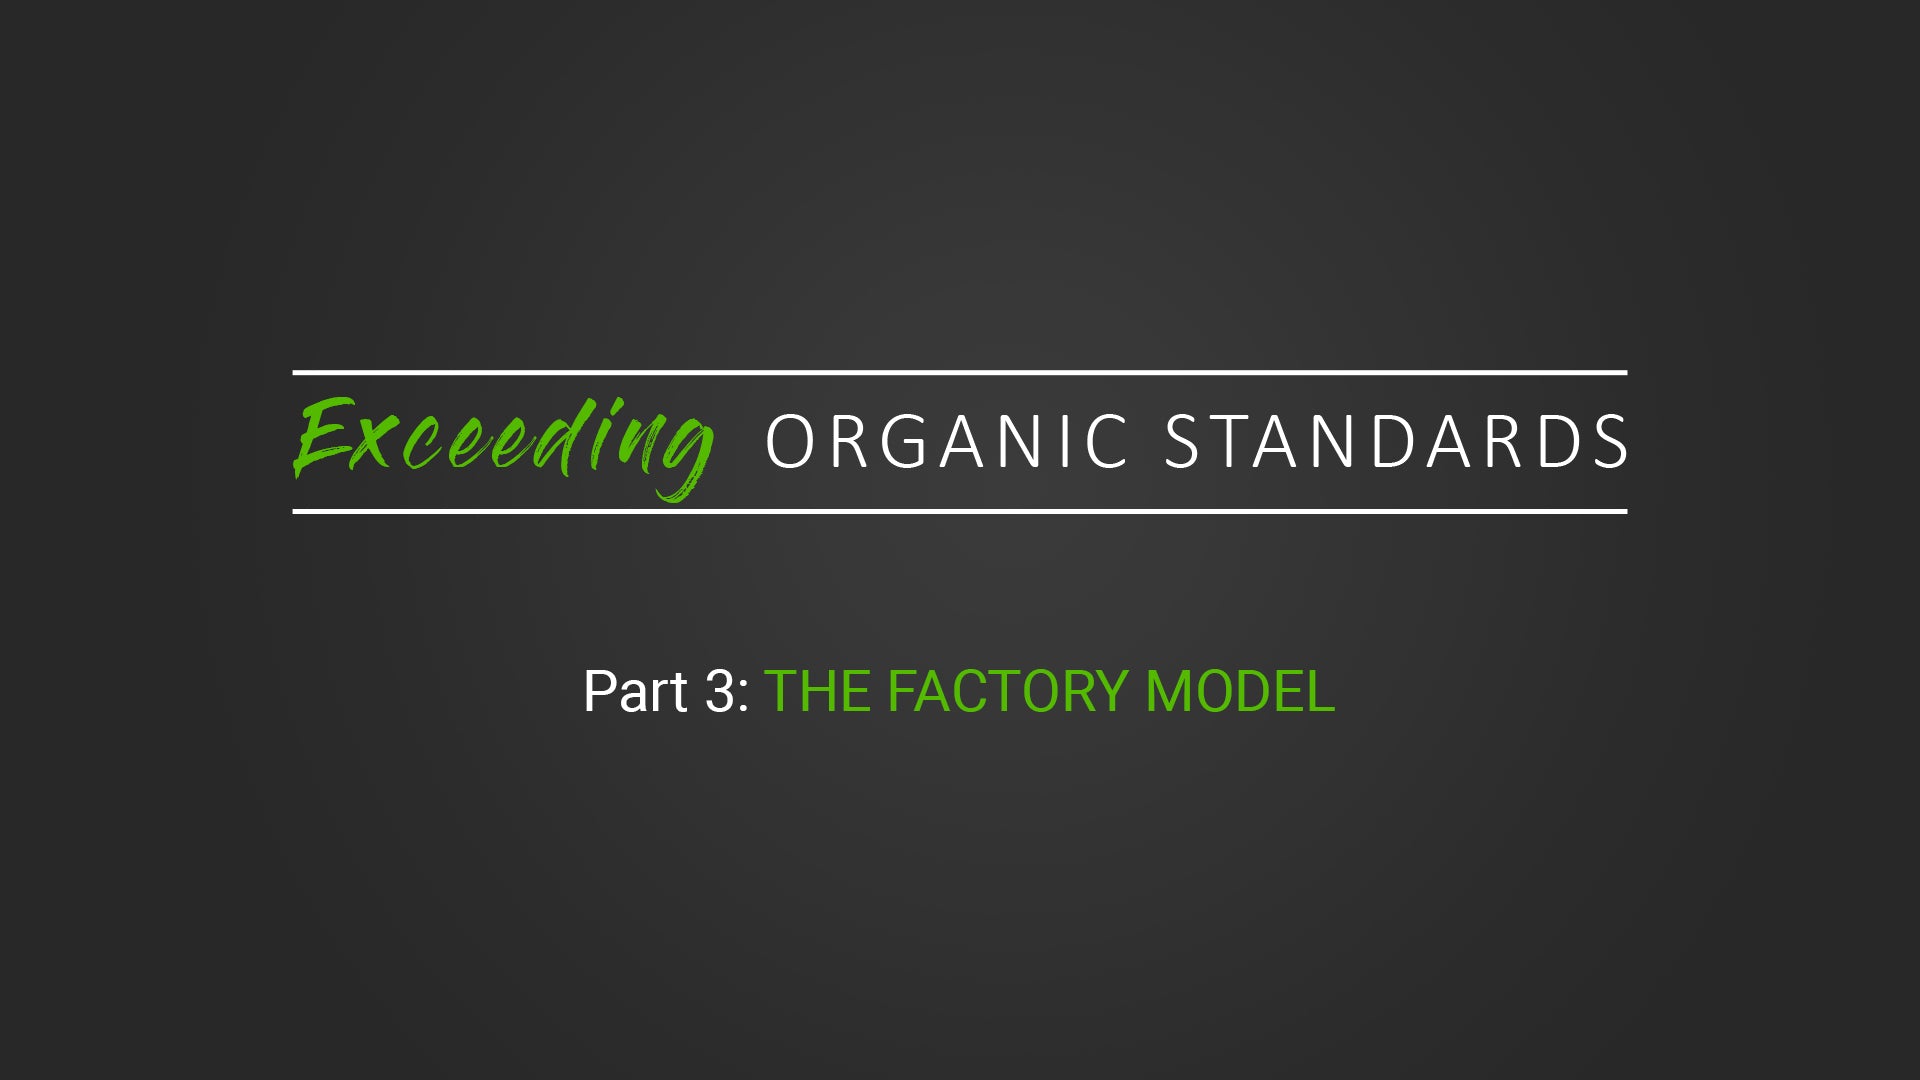 Exceeding Organic Standards: Part 3 The Factory Model